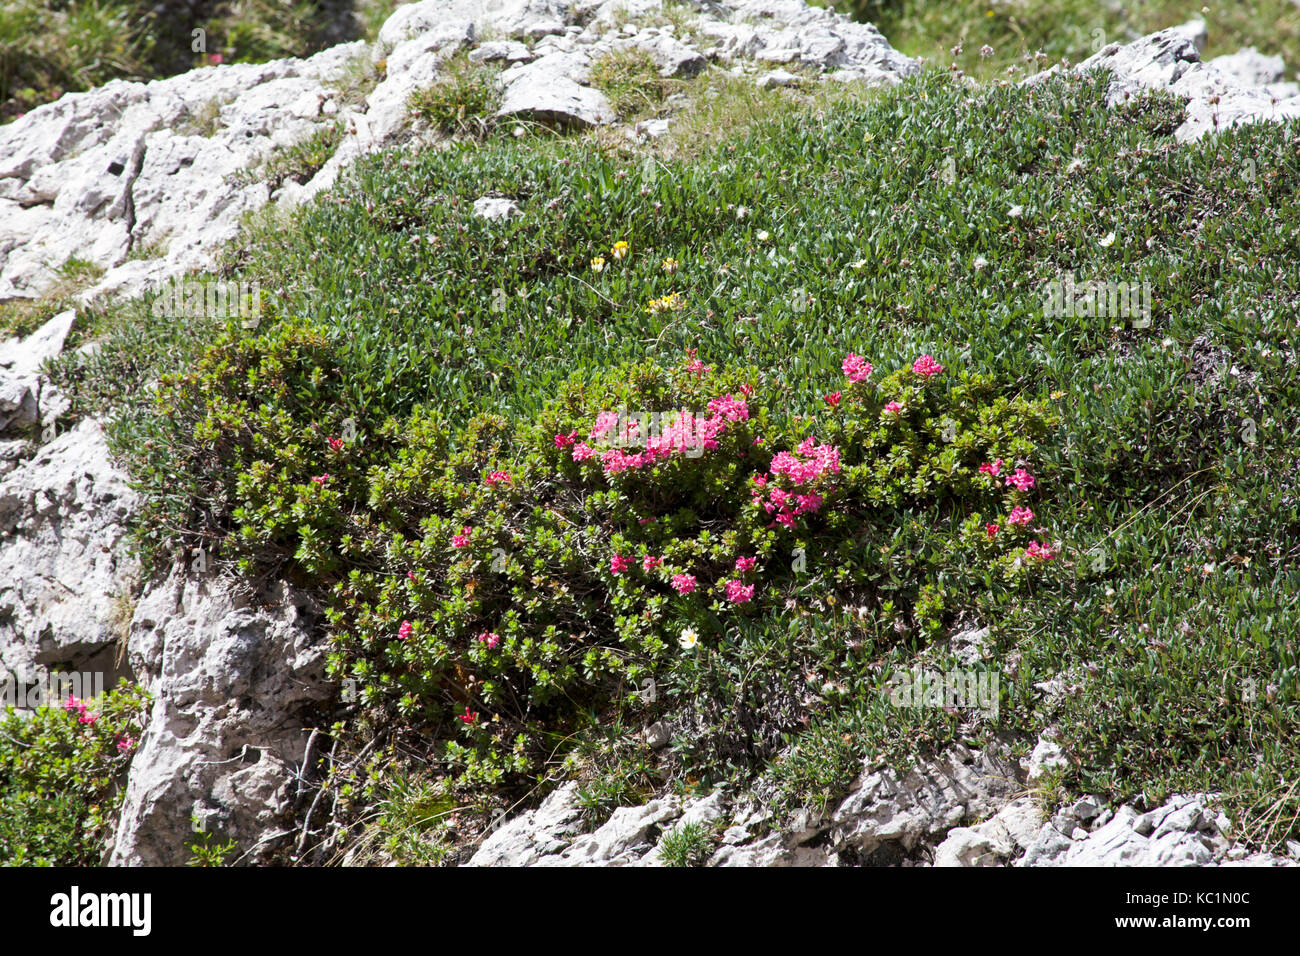 Hairy Alpenrose  growing beside the path from Jimmey's Hutte to Juef de Cir above the Passo Gardena near  Selva Val Gardena Dolomites  Italy Stock Photo